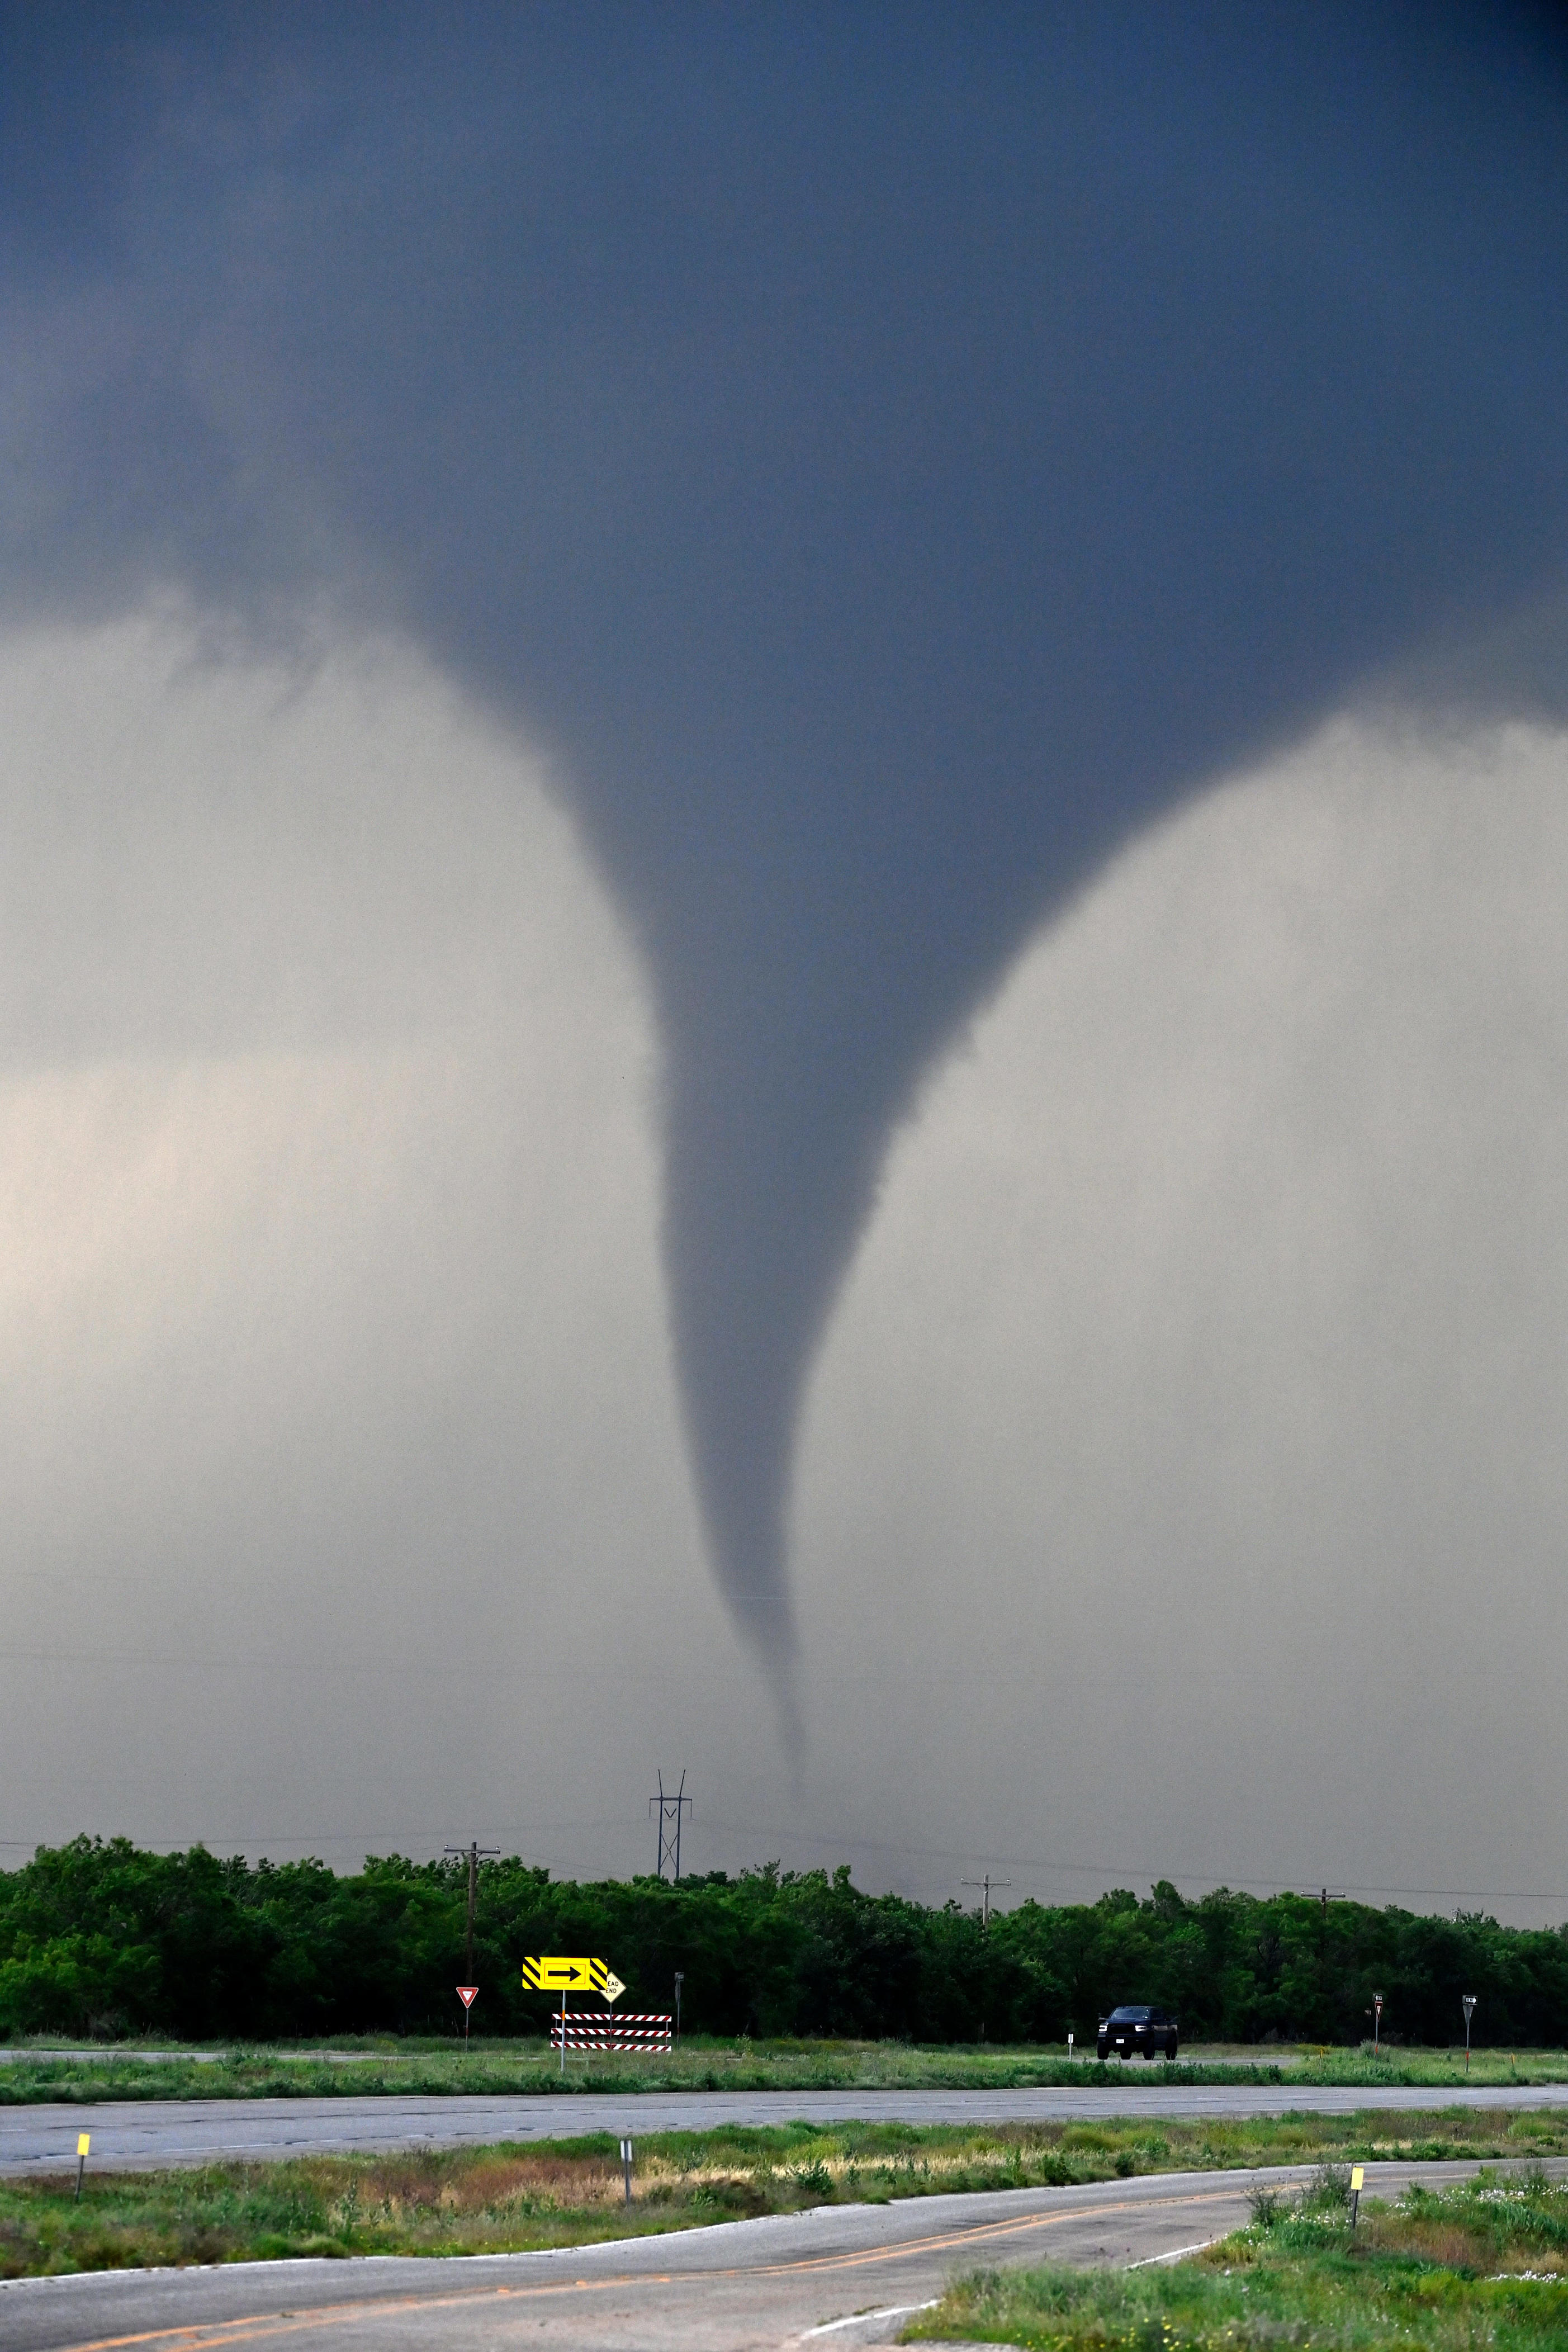 rare 'high risk' warning issued: central u.s. braces for 'significant' tornado outbreak